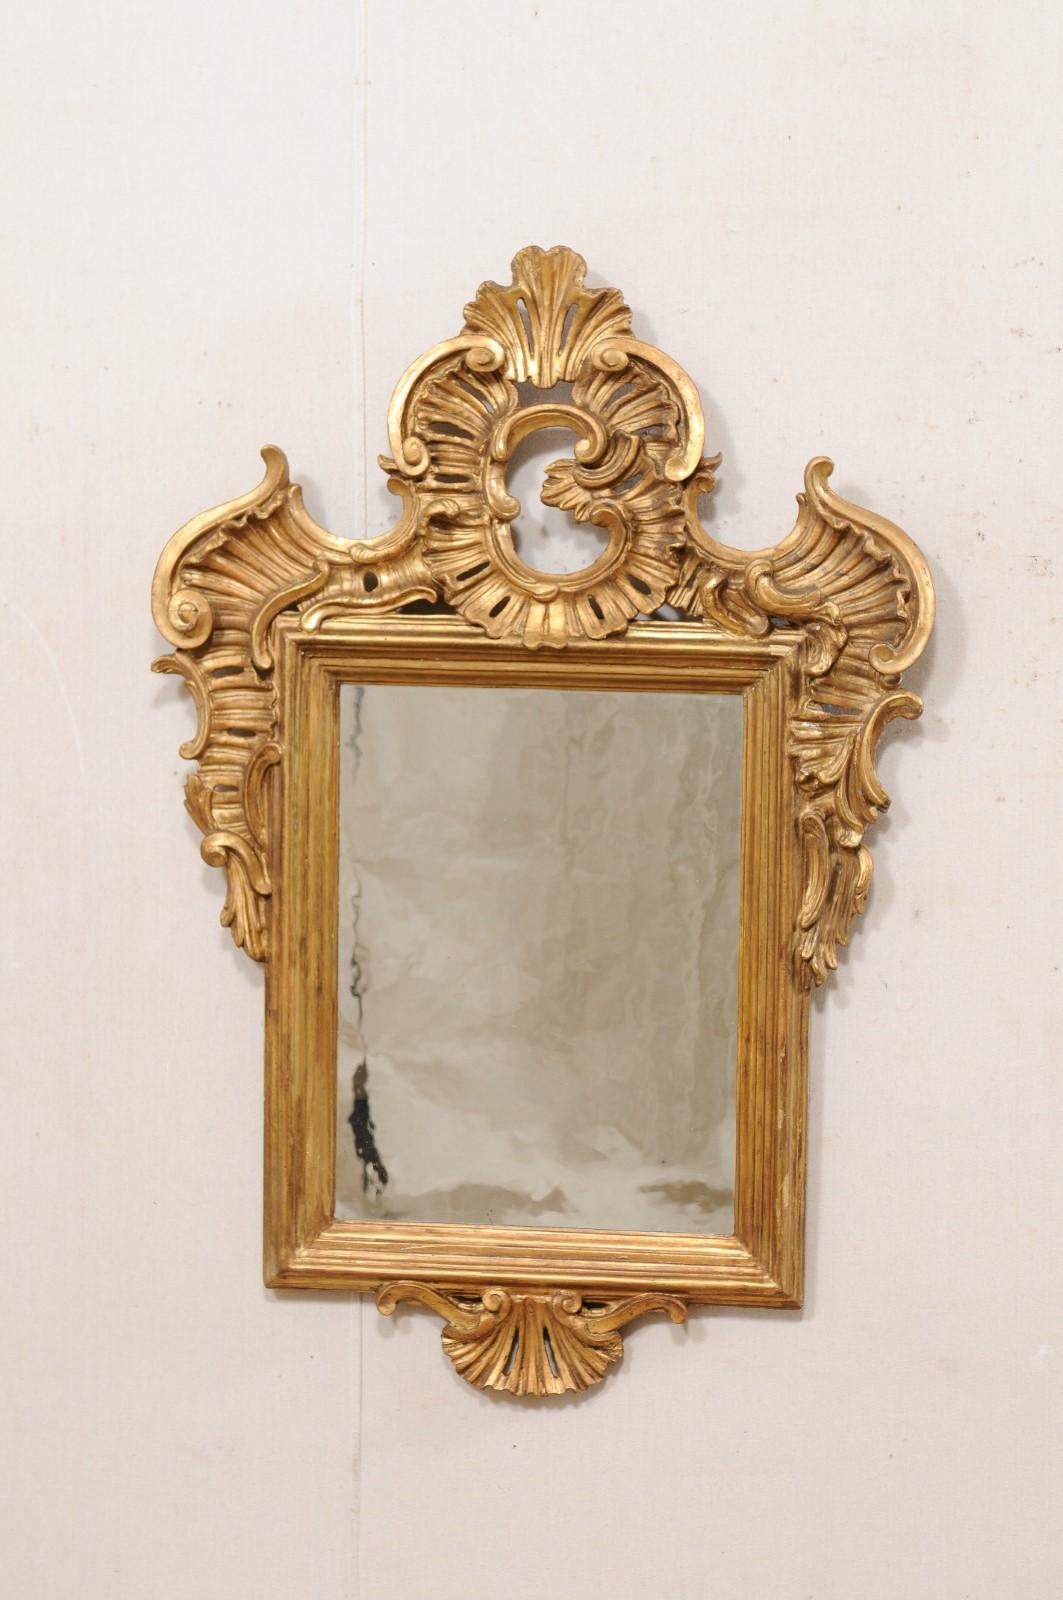 A Continental Baroque style wood carved and gilt mirror from the turn of the 18th and 19th century. This antique wall mirror from Europe has a rectangular-shaped mirror, with beautiful old wavy glass, set within a molded frame and elaborated adorn